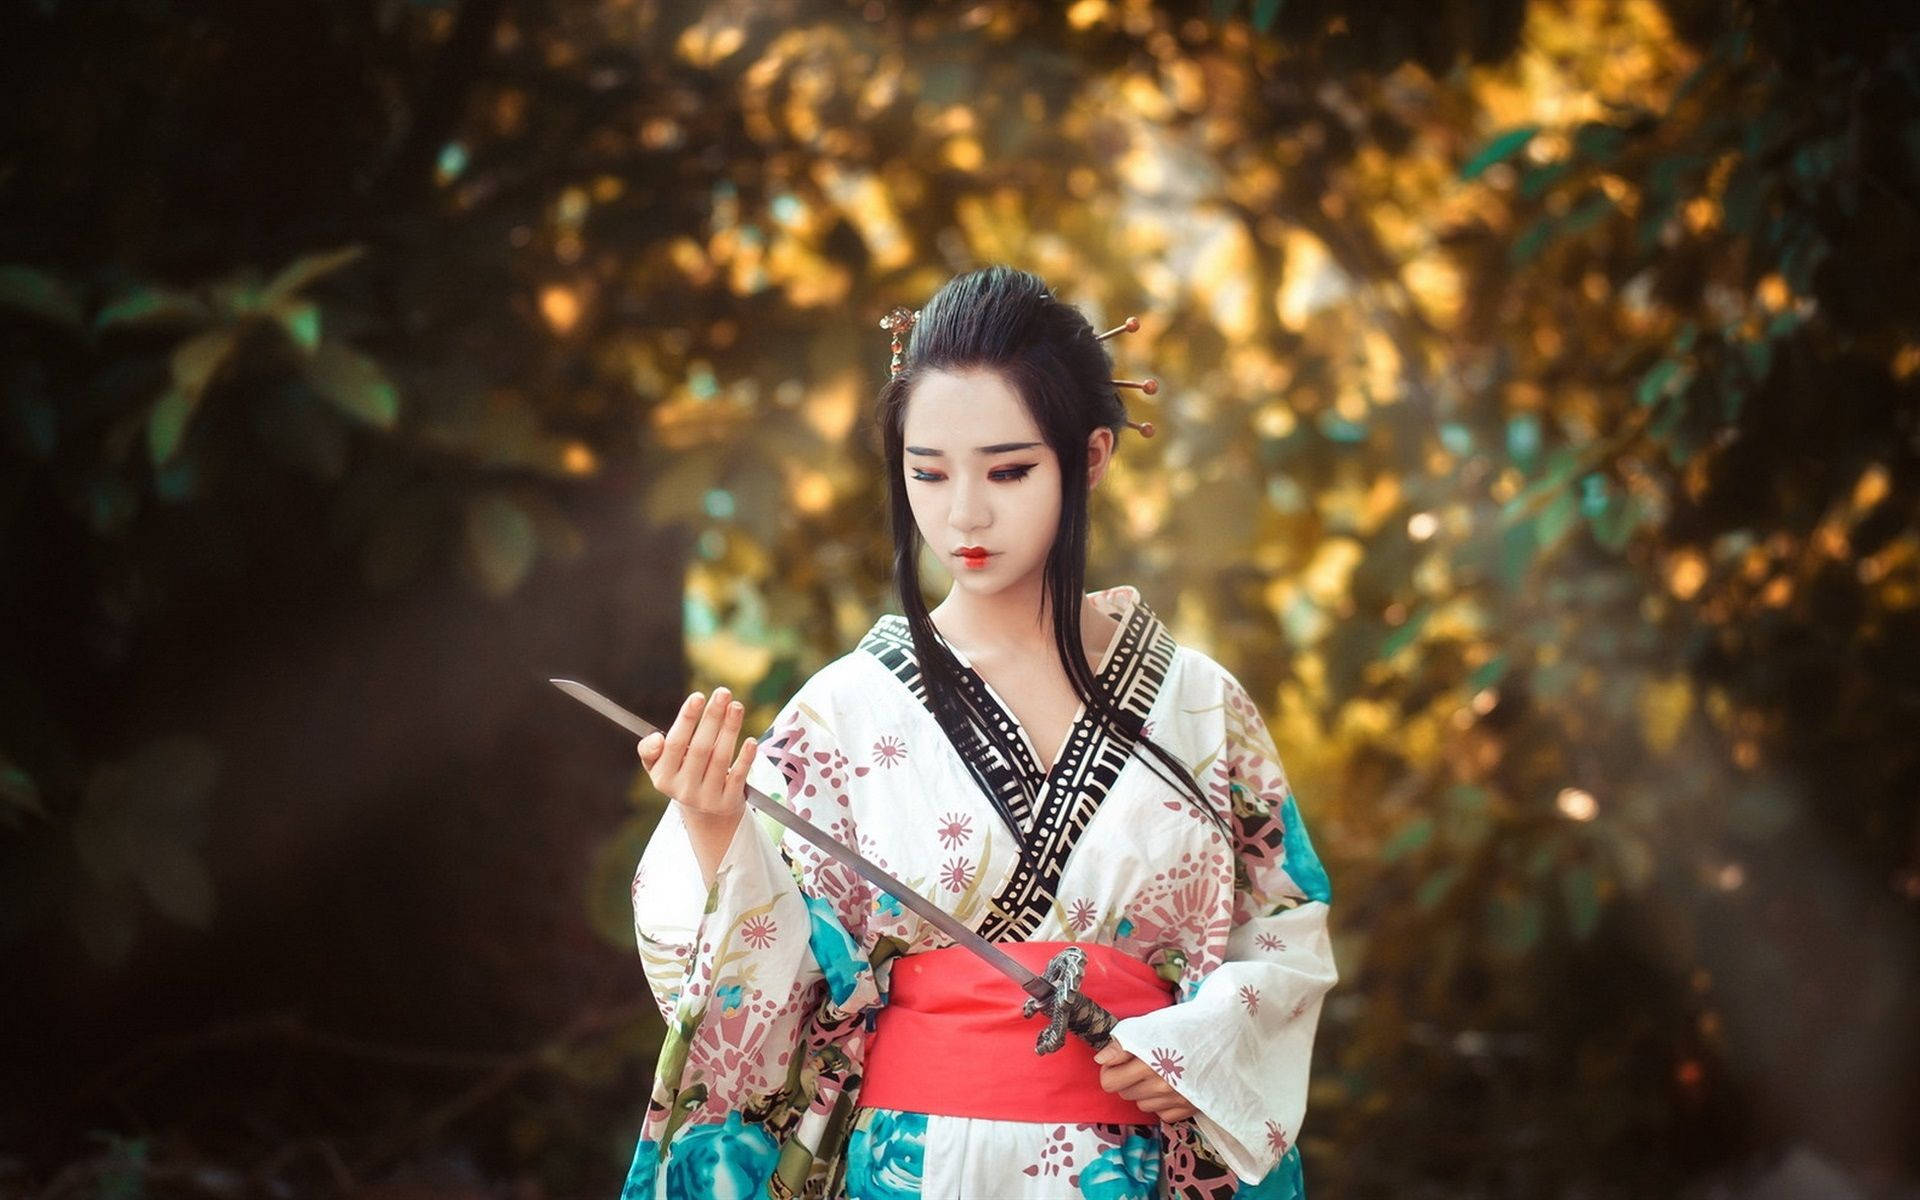 Japan Girl In A Kimono With A Sword Background